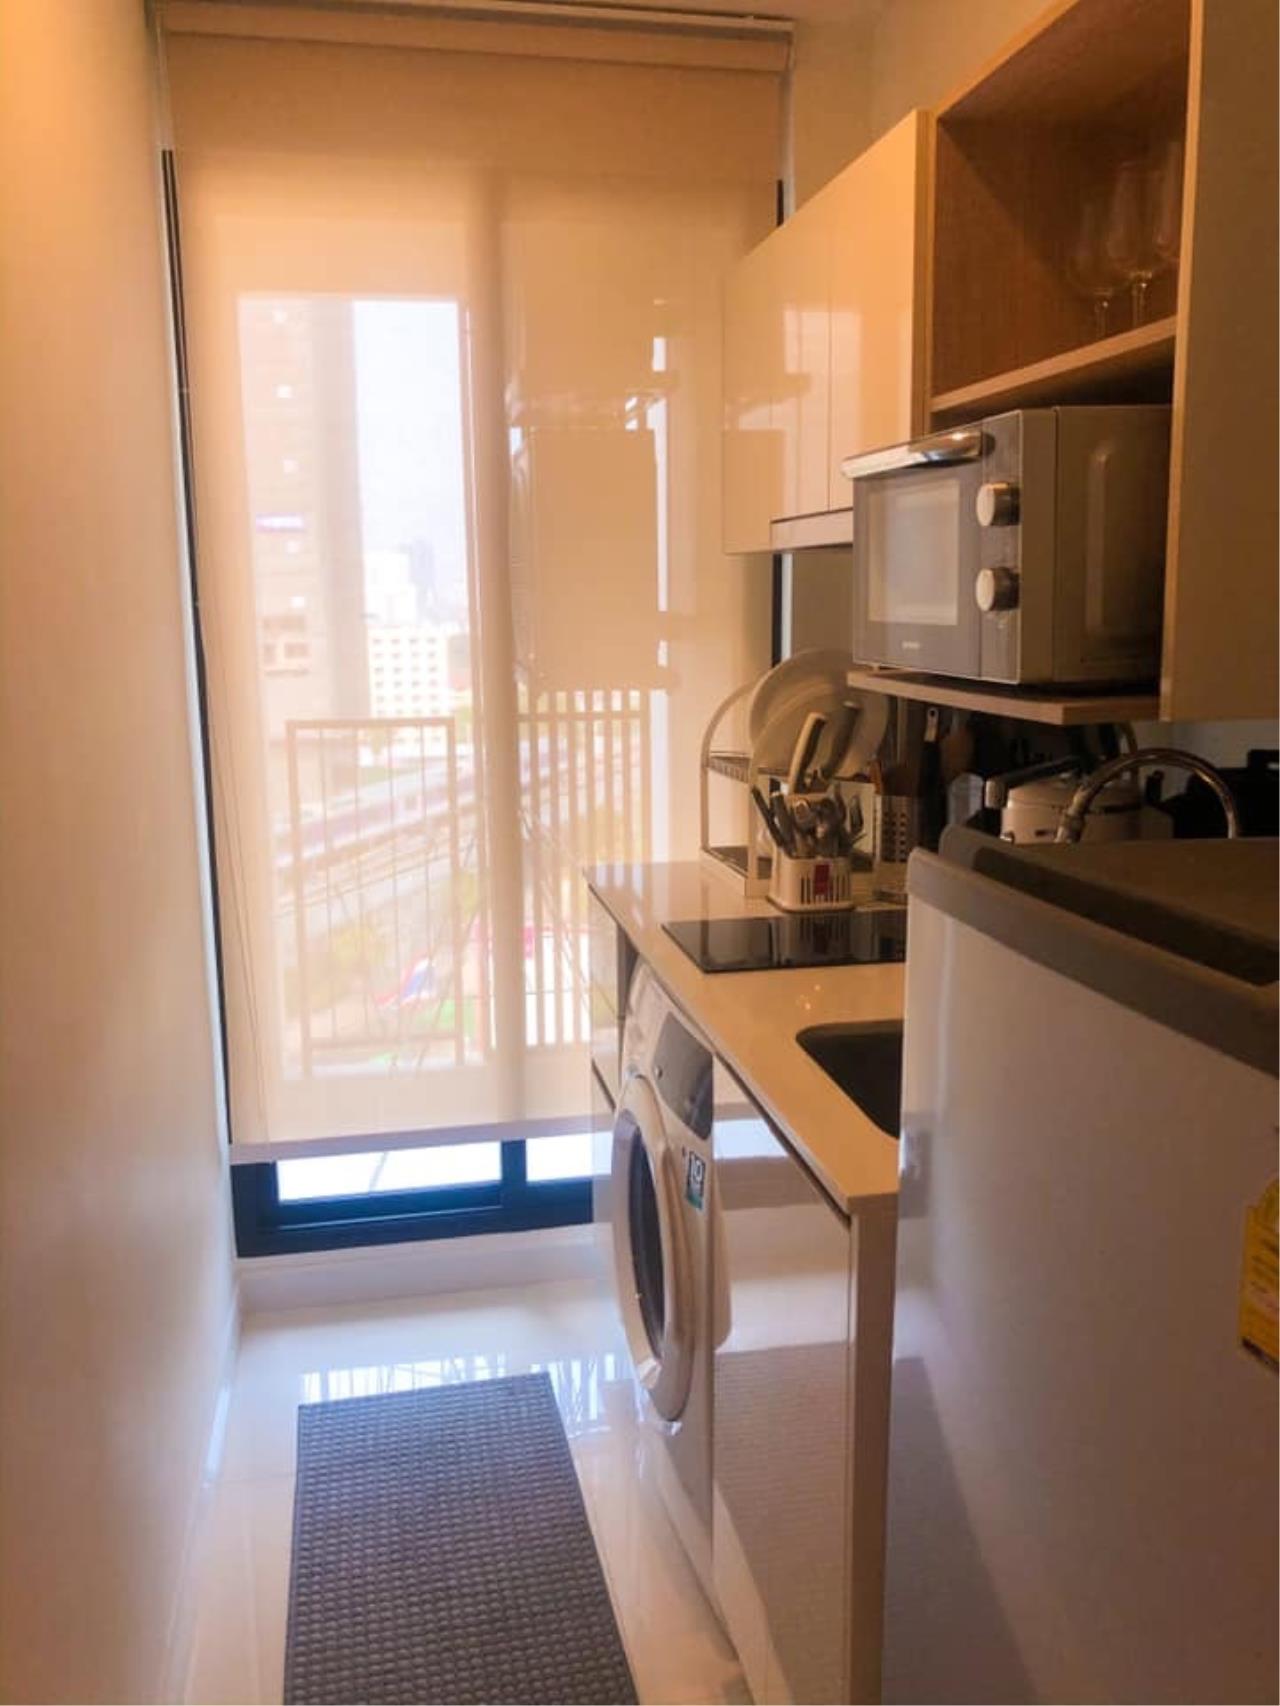 Agent - Chalida Jaroonratanakul Agency's HP-162 Rent out Urgently!! Knightbridge Tiwanon 1 Bedroom 29.39 sqm. 12nd Floor - Fully Furnished + Washing machine   4